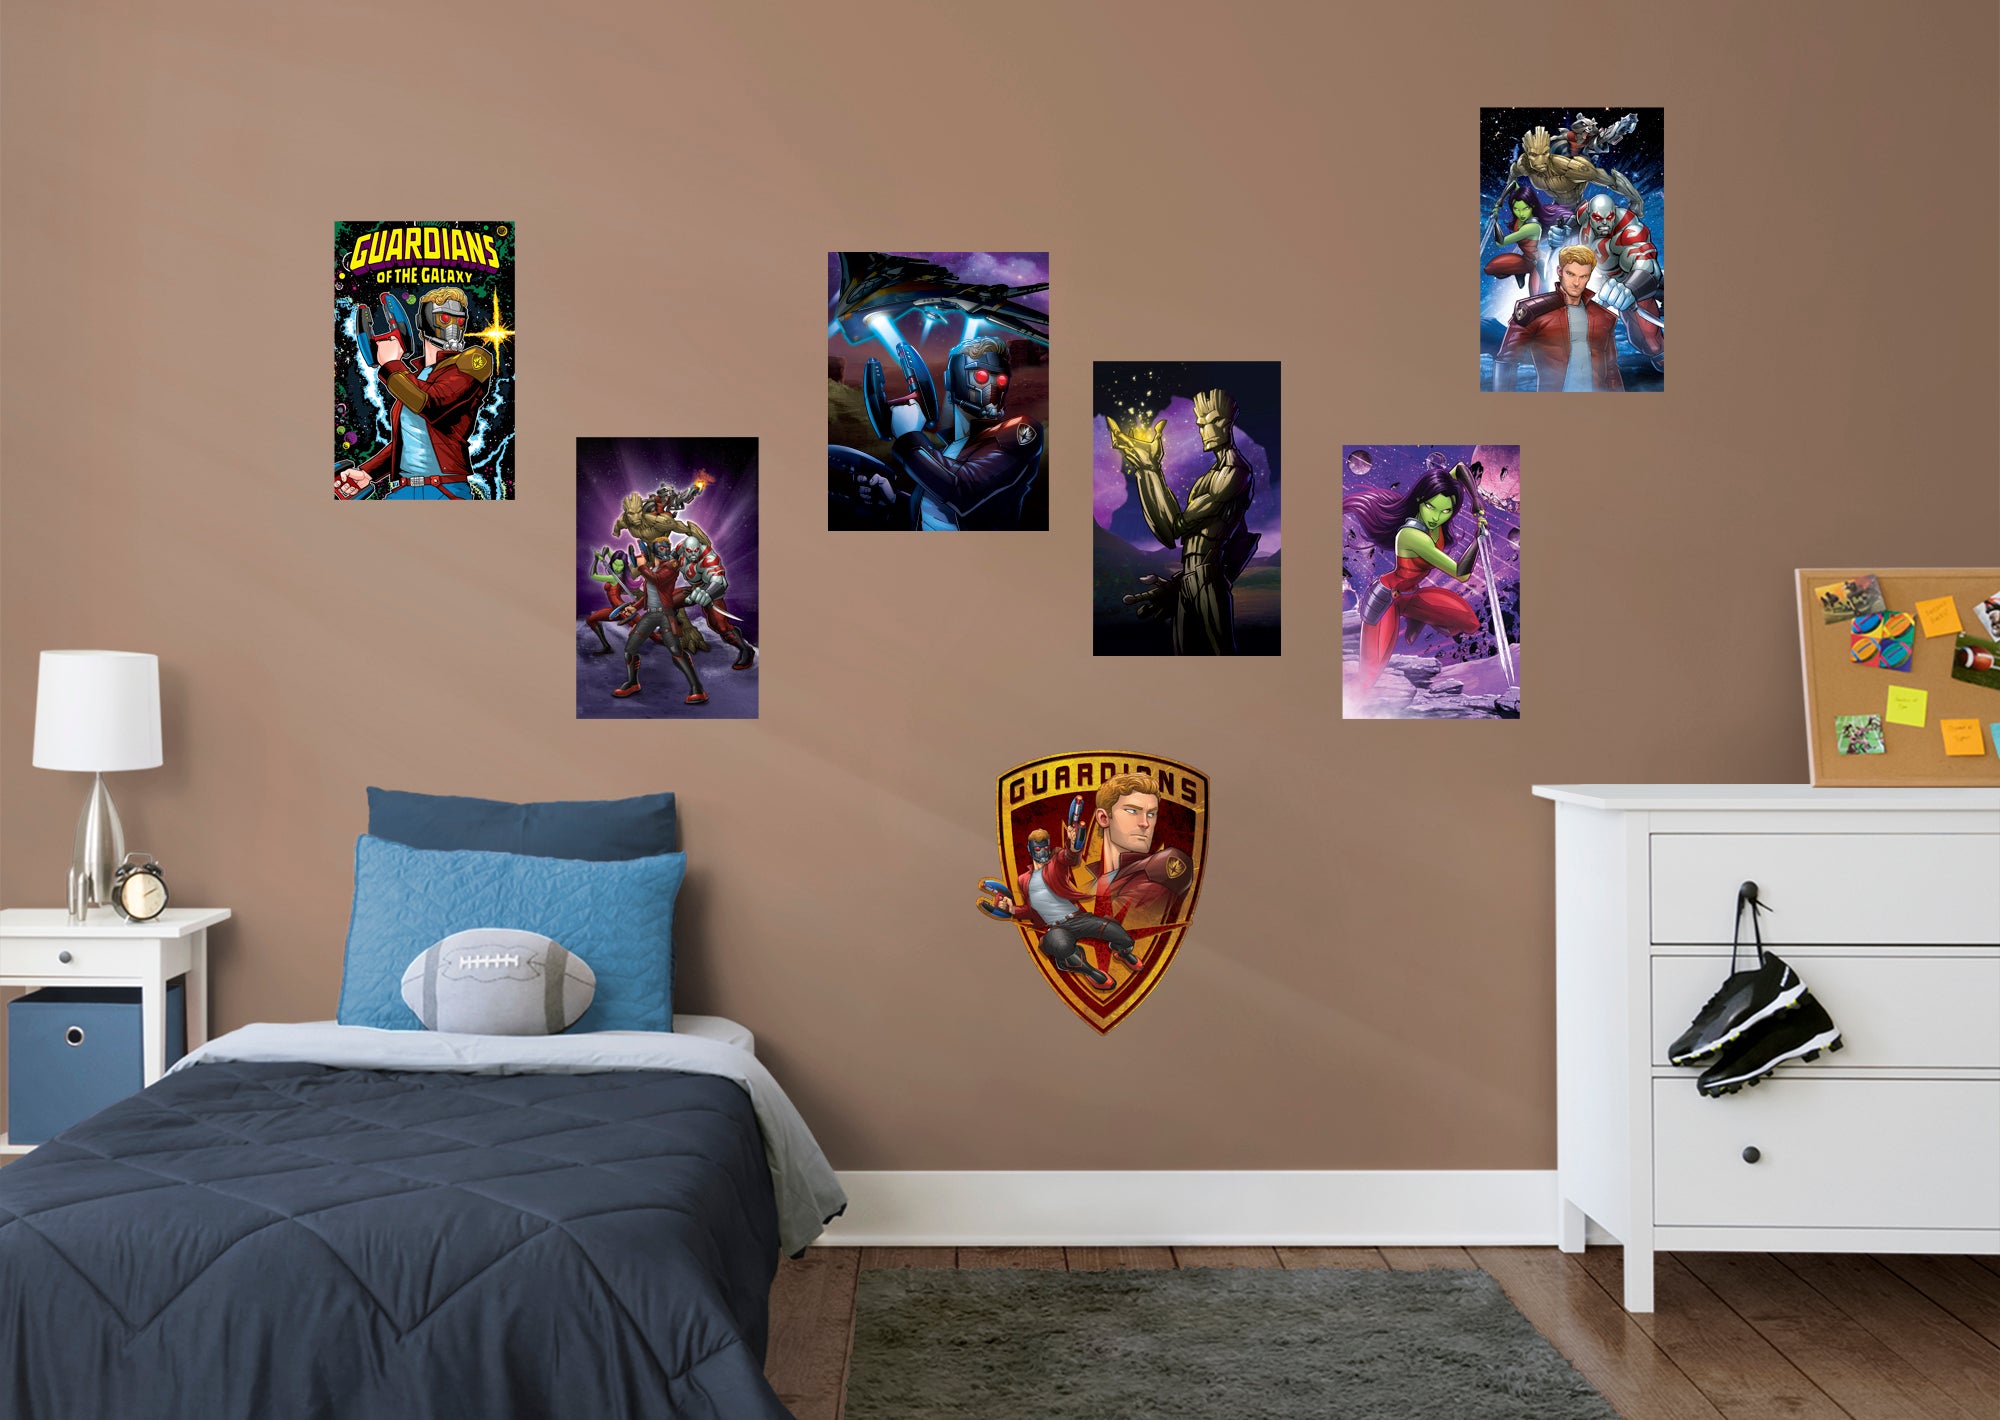 Guardians of the Galaxy Murals Collection - Officially Licensed Marvel Removable Wall Decal Collection (26"W x 16"H) by Fathead